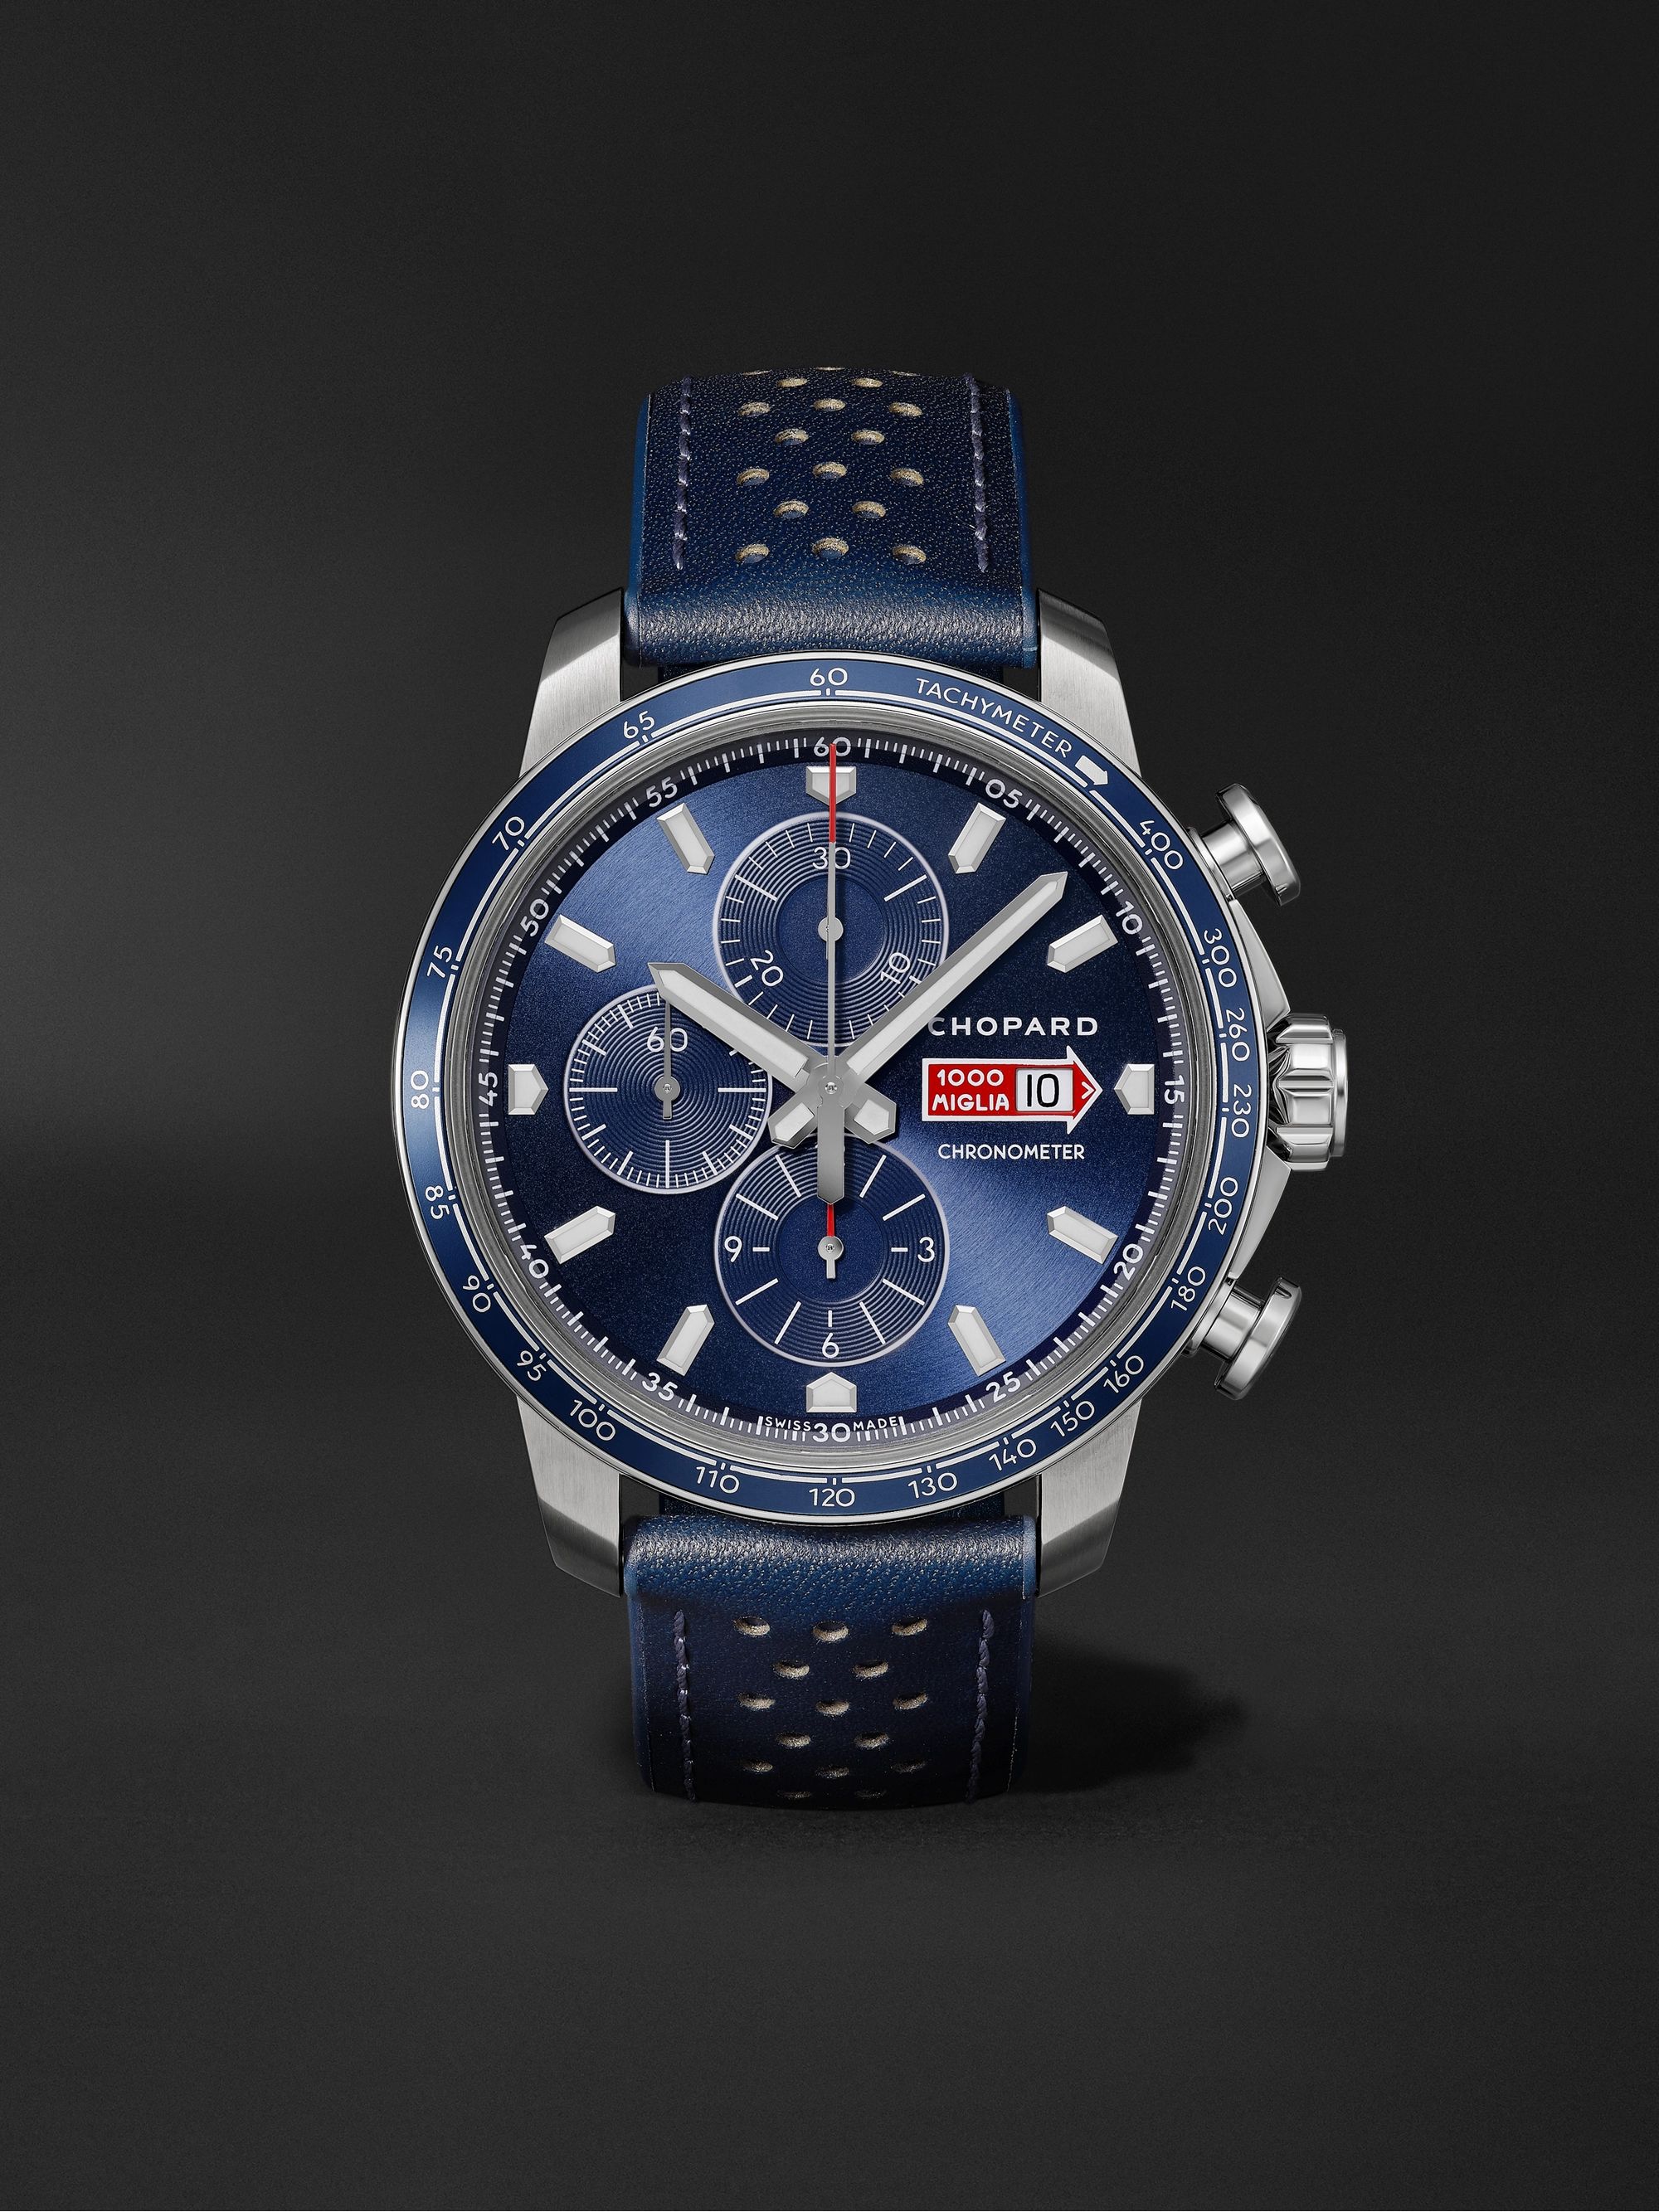 Mille Miglia GTS Azzurro Chrono Automatic Limited Edition 44mm Stainless  Steel and Leather Watch, Ref. No. 168571-3007